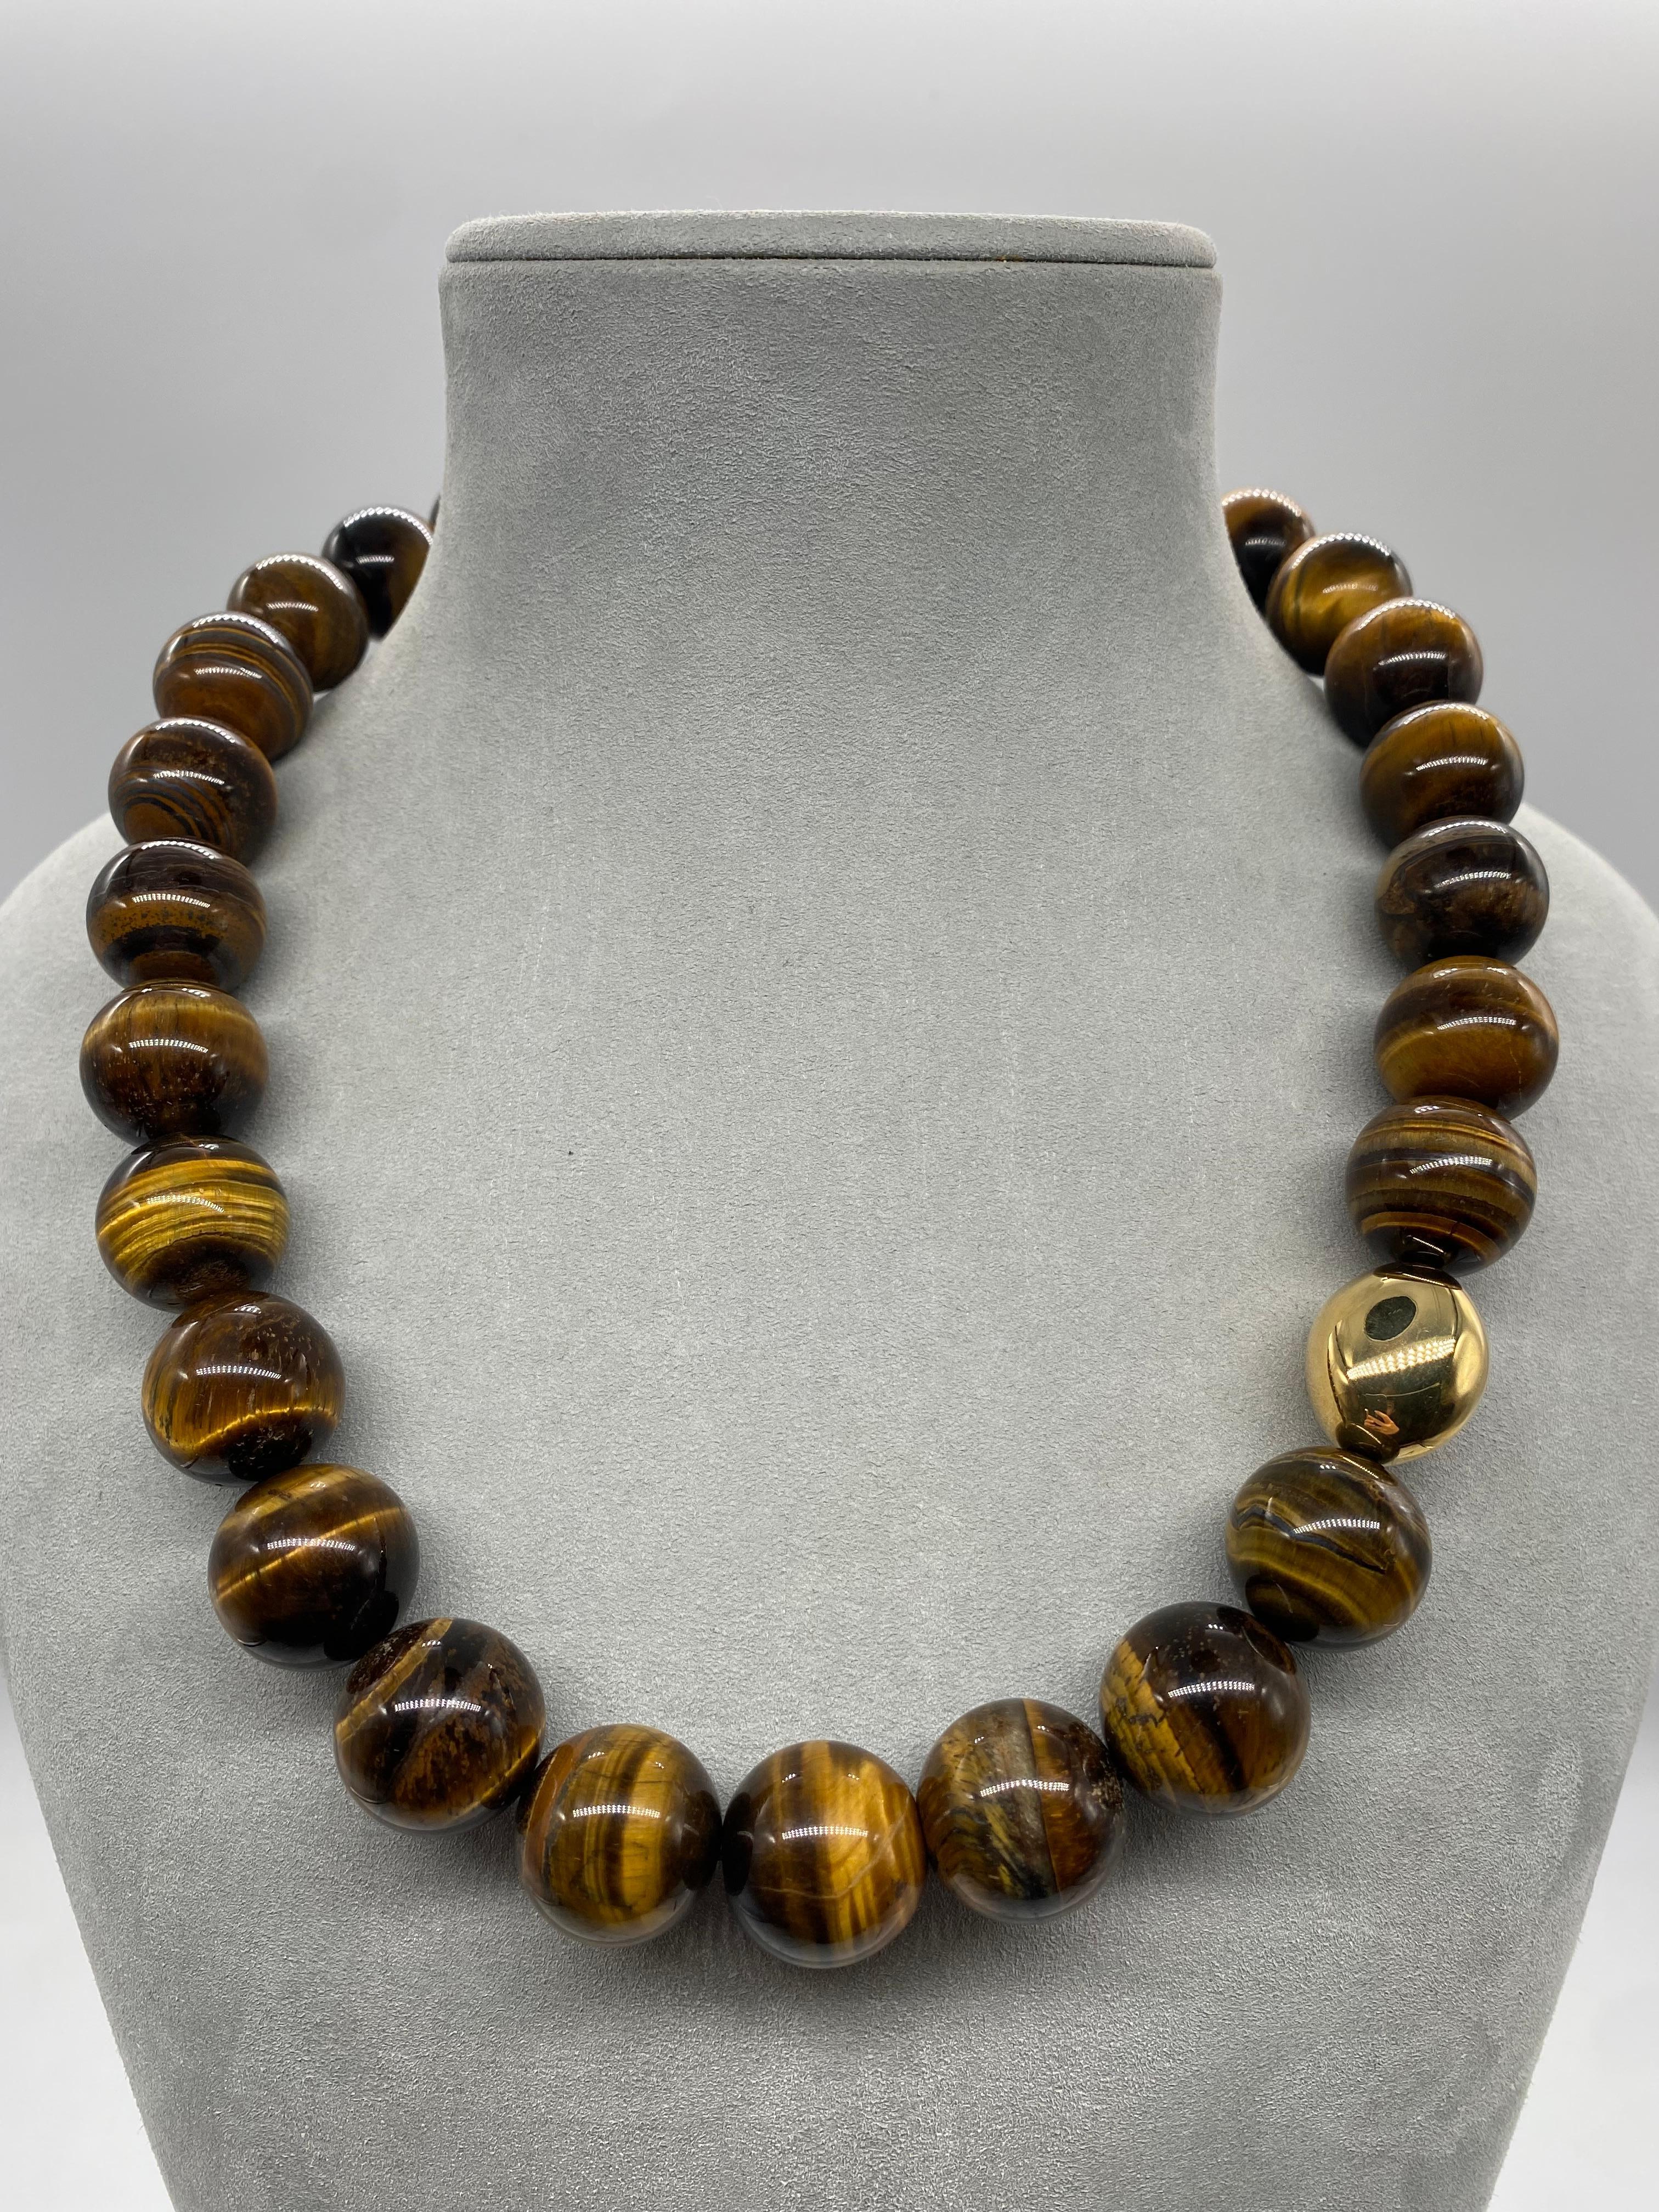 French Beaded Necklaces with Tiger Eye Stone, Yellow Gold and Bakelite
French Collection by Mesure et Art du Temps.

French beaded necklaces accompanied by 26 tiger eyes, 1 beaded yellow gold and to close your necklace there is an easy closure made